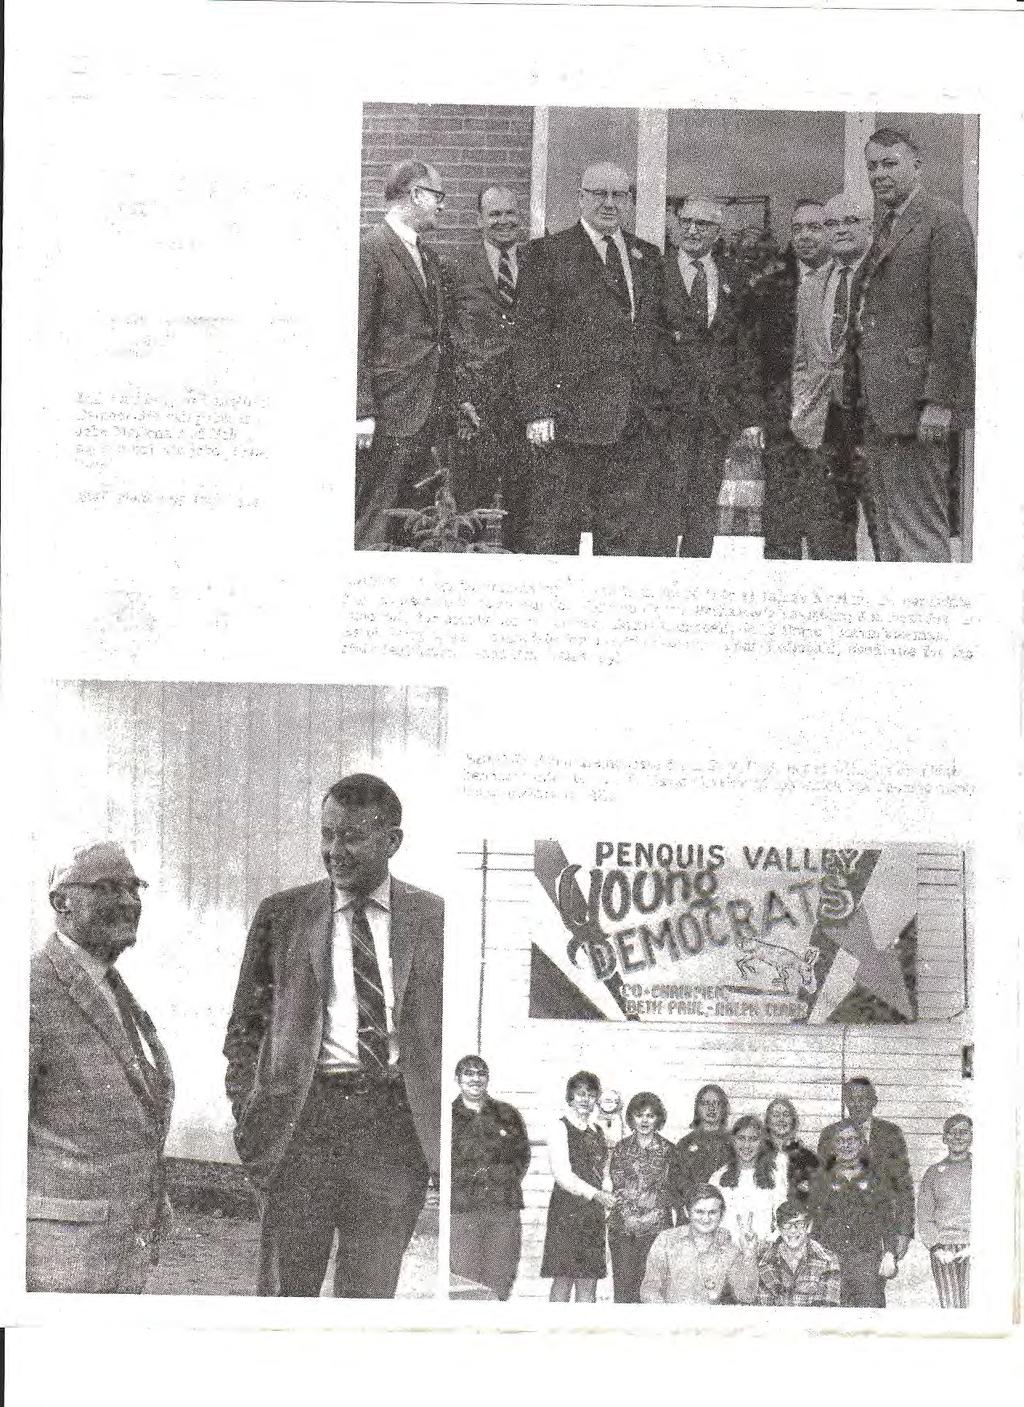 THE TOWN CRIER October 29, 1970 Page 11 Bill Hathaway and another Democratic campaigner, John McDonald of Milo,